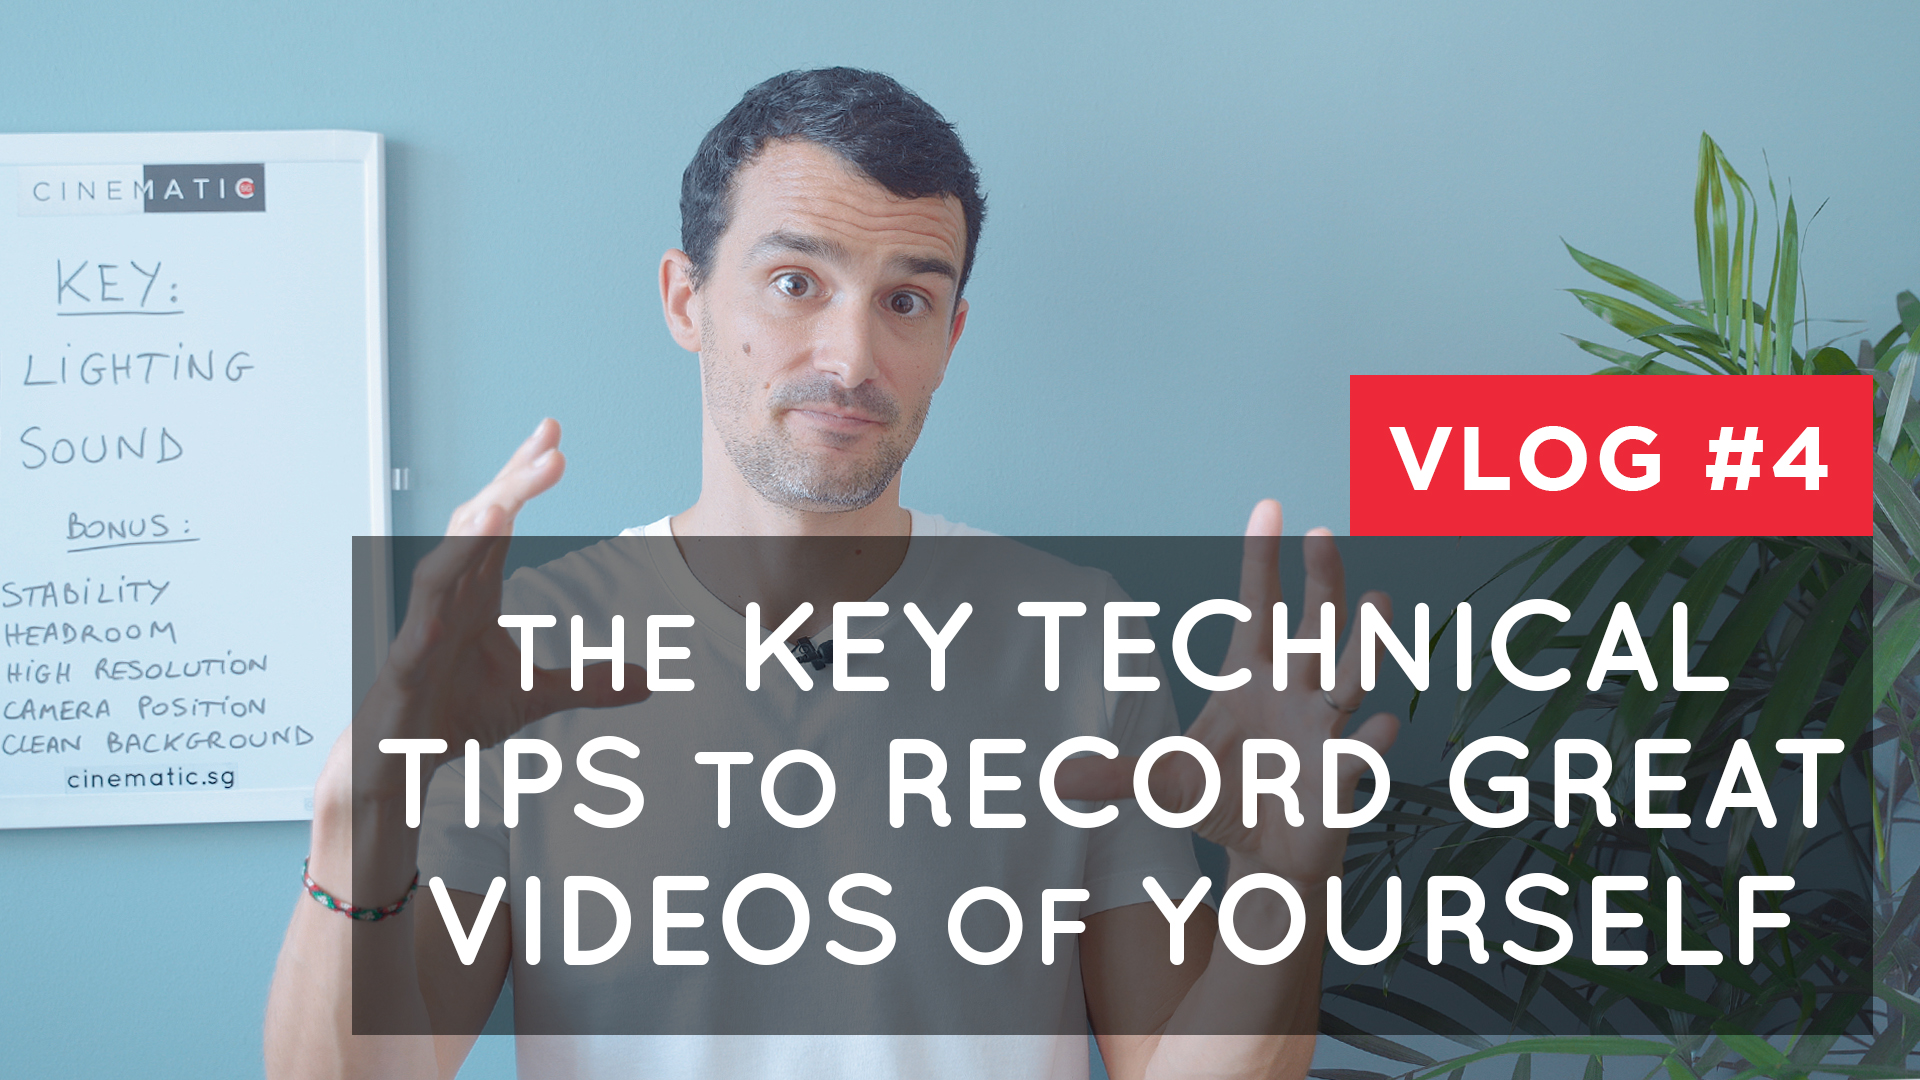 The key technical tips to record great videos of yourself